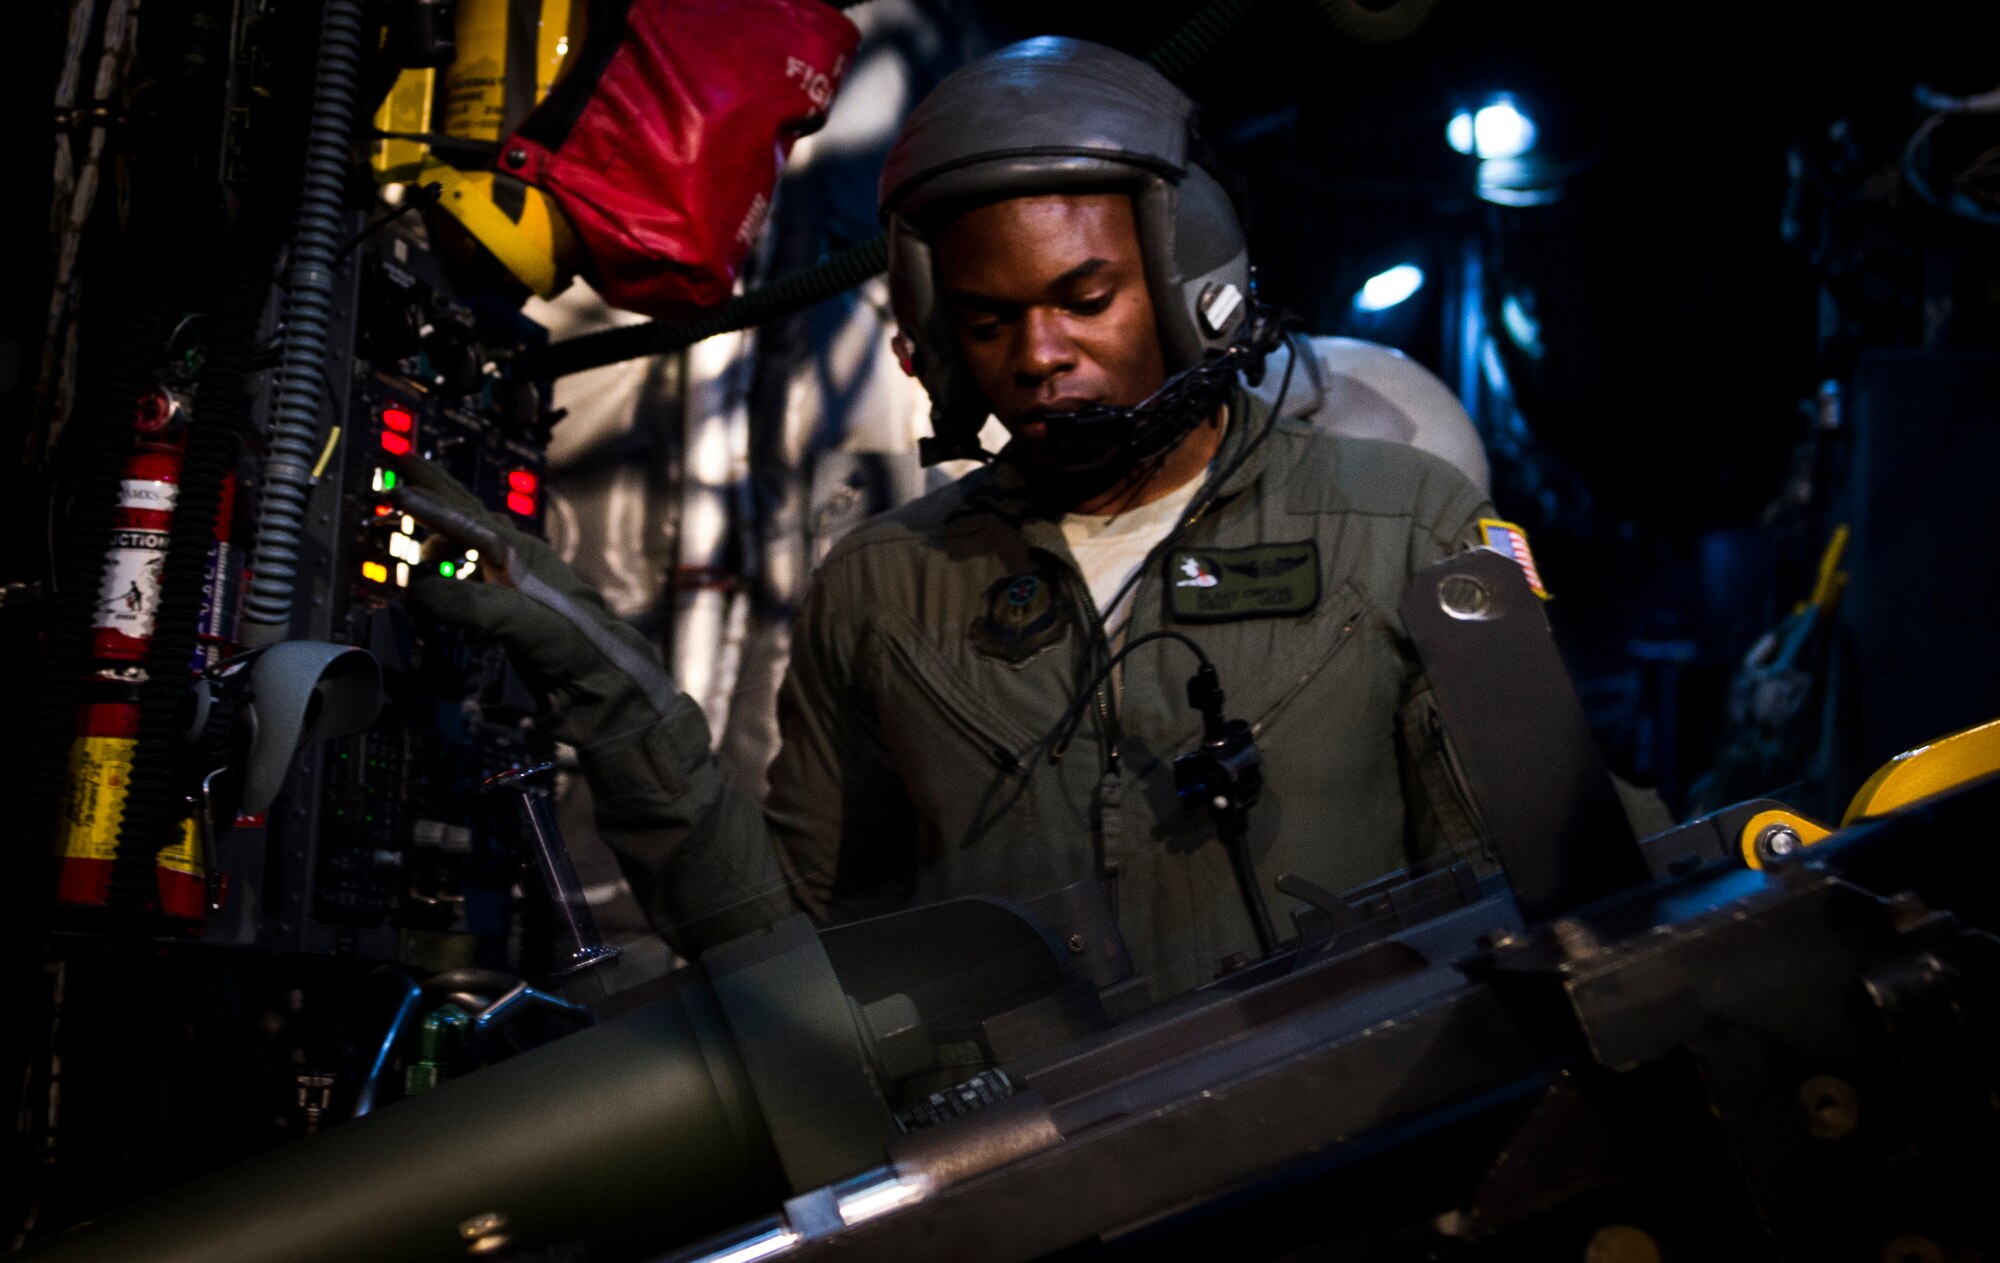 Staff Sgt. Blake Owens, 4th Special Operations Squadron aerial gunner, prepares to reload a 105mm cannon onboard an AC-130U Spooky Gunship during a training flight, Oct. 15, 2014. The AC-130U is the latest in a long line of side-firing gunships which began in the early 1960s with the AC-47D Spooky. (U.S. Air Force photo/Senior Airman Christopher Callaway)